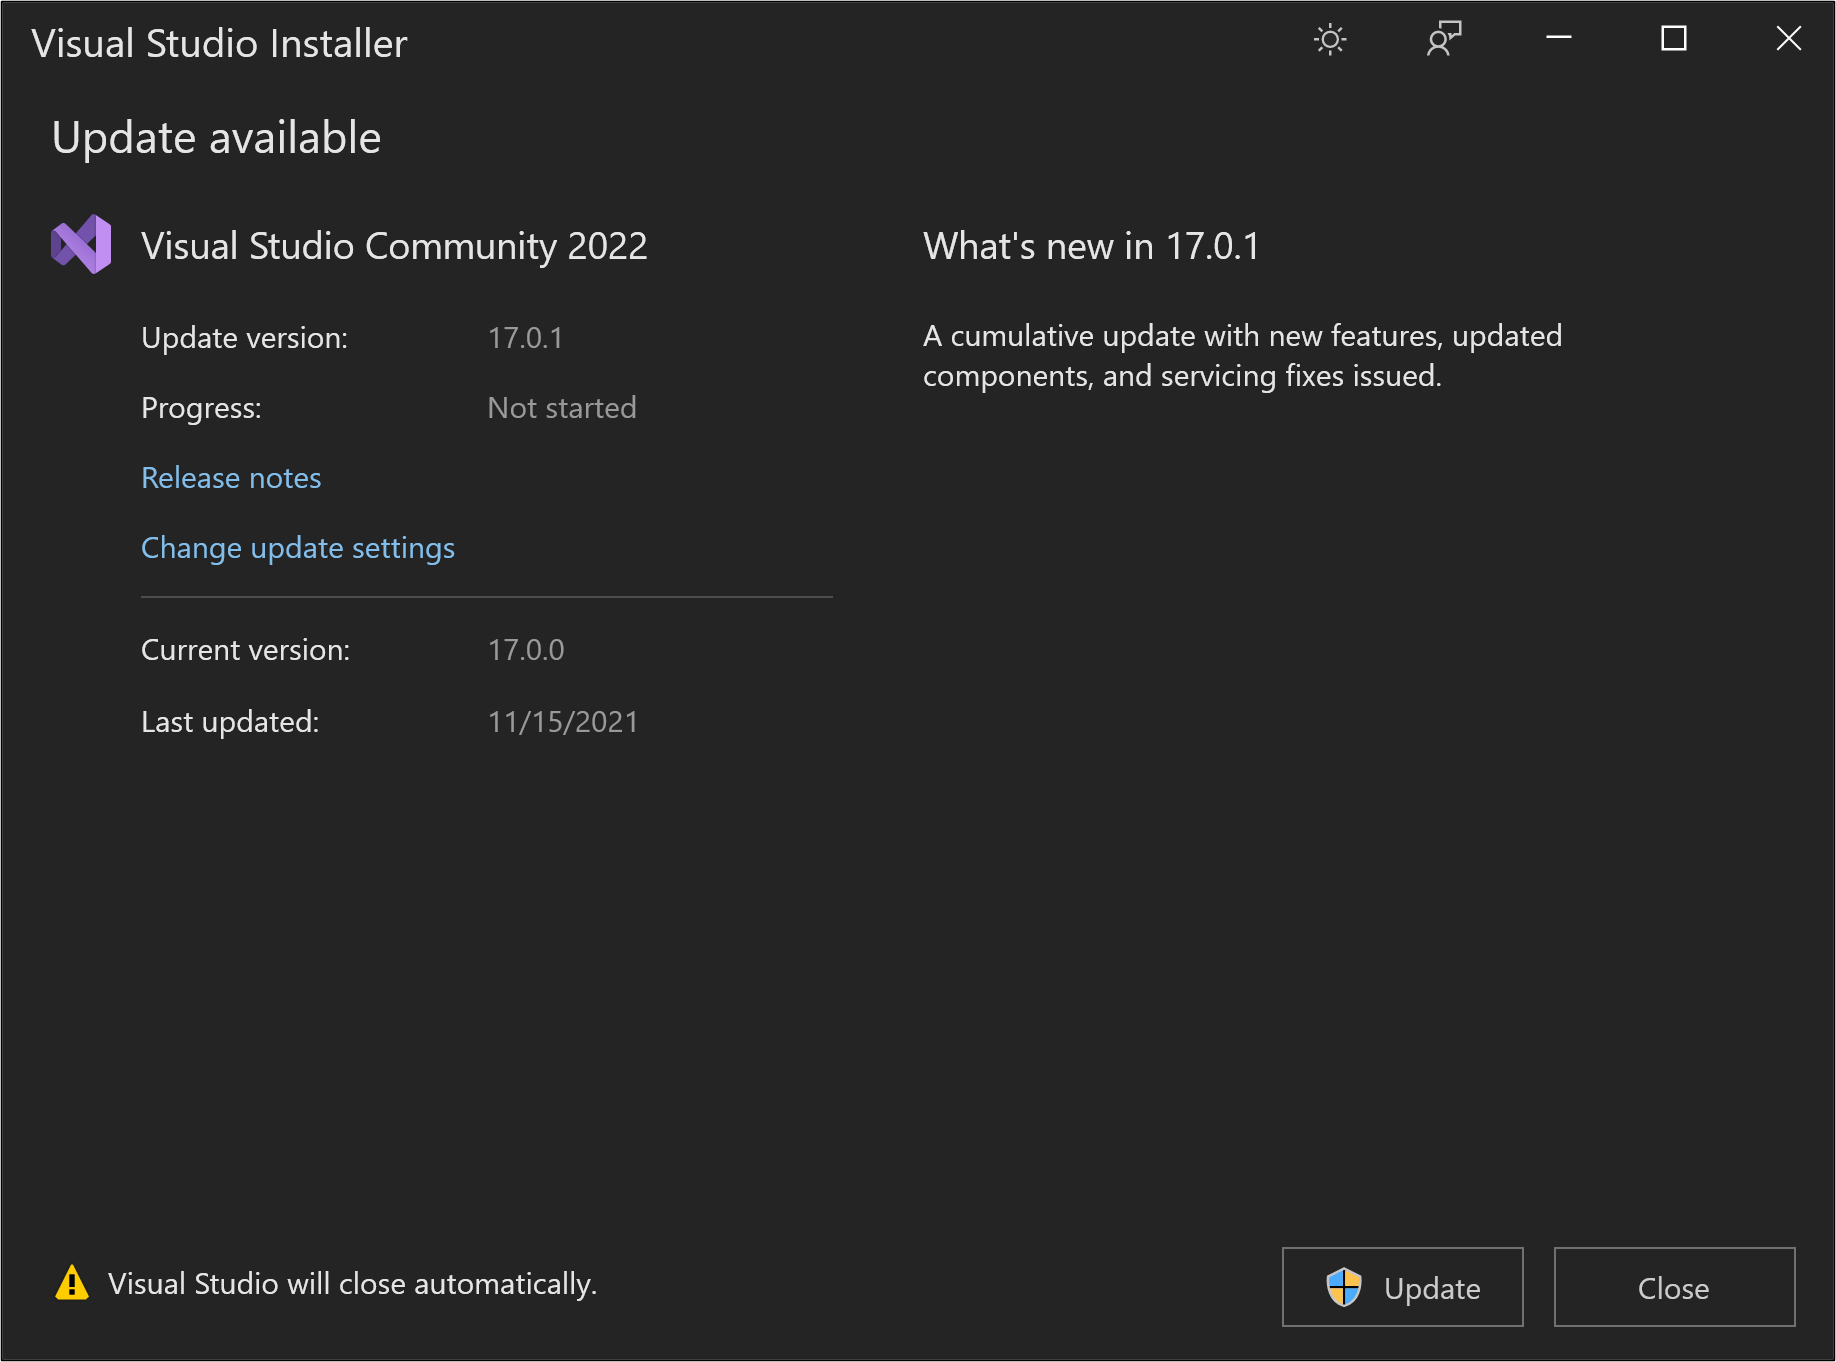 Screenshot showing the Update button in the 'Update available' dialog box in Visual Studio 2022.